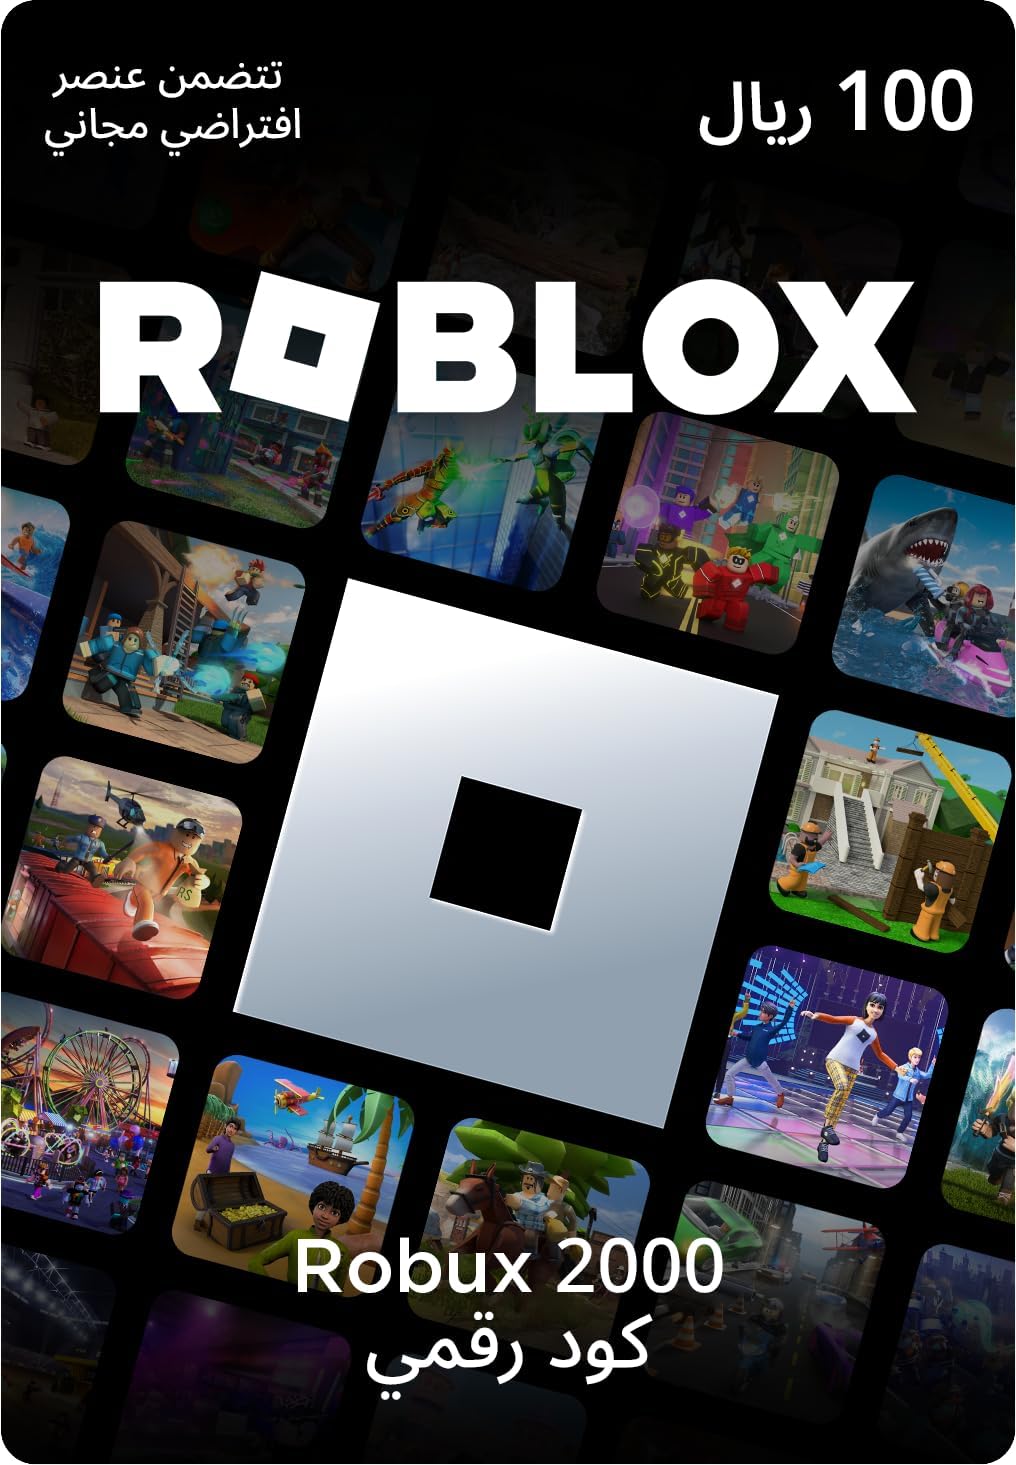 Roblox Digital Gift Code for 800 Robux [Redeem Worldwide - Includes Exclusive Virtual Item] [Online Game Code]